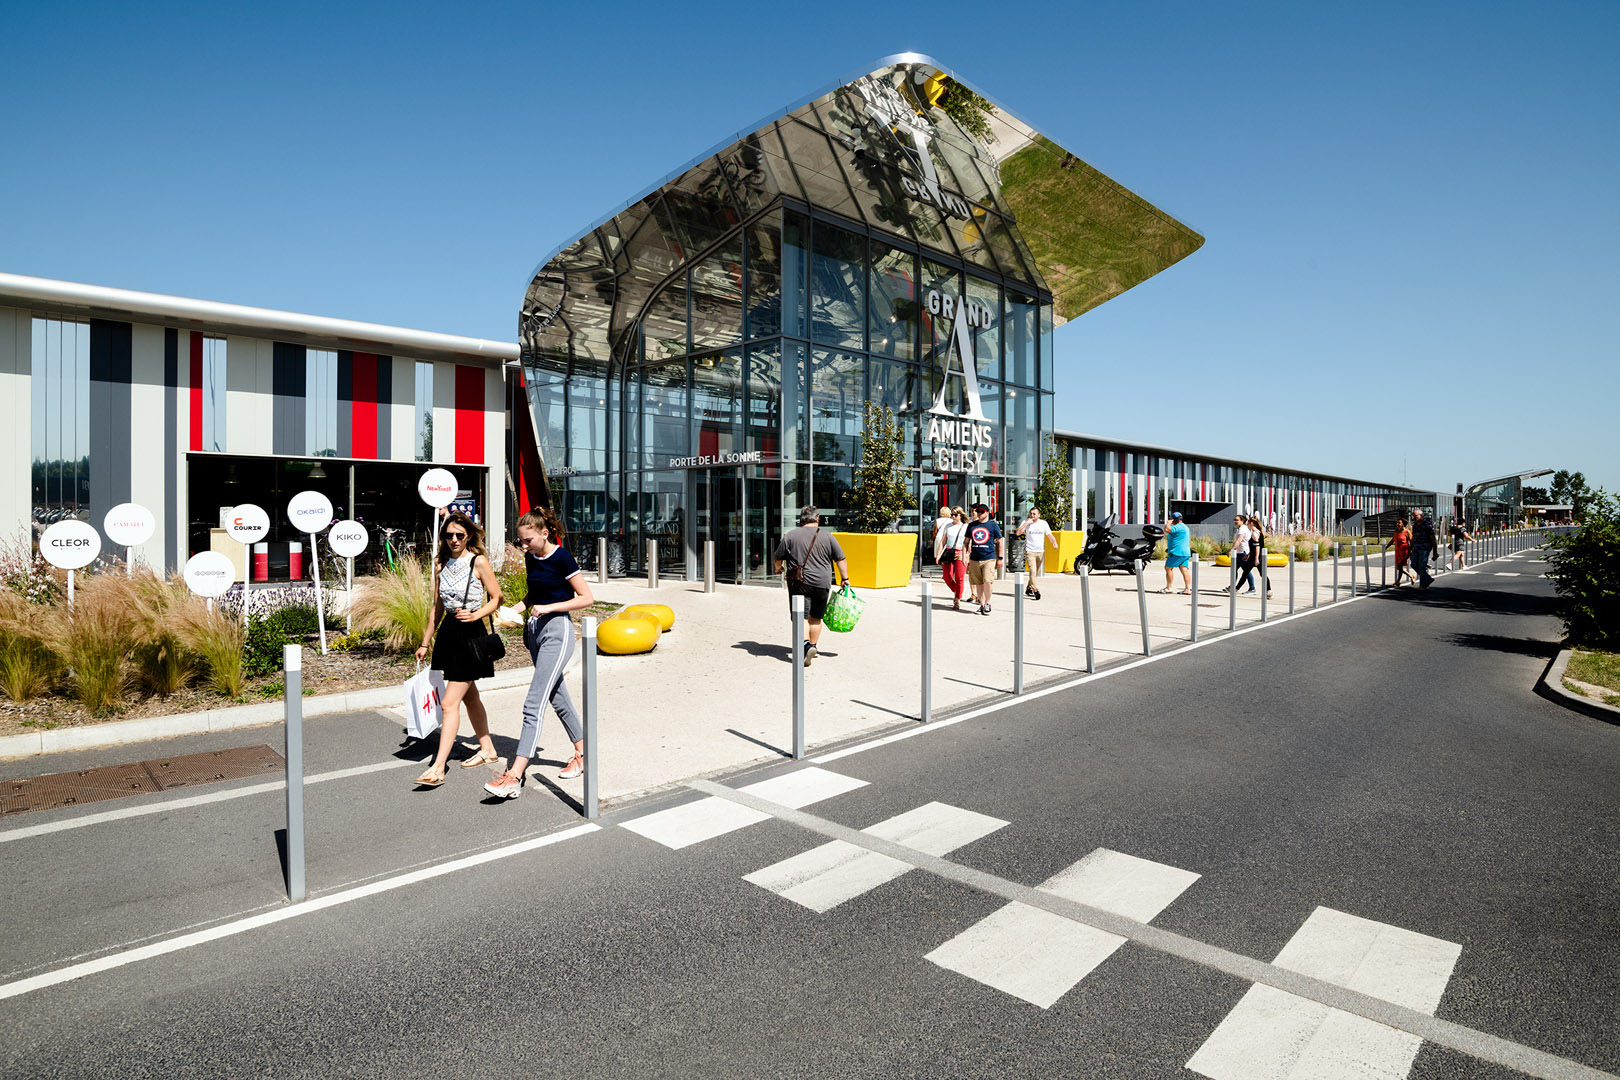 Exterior of entrance to European shopping centre with Crossing in foreground